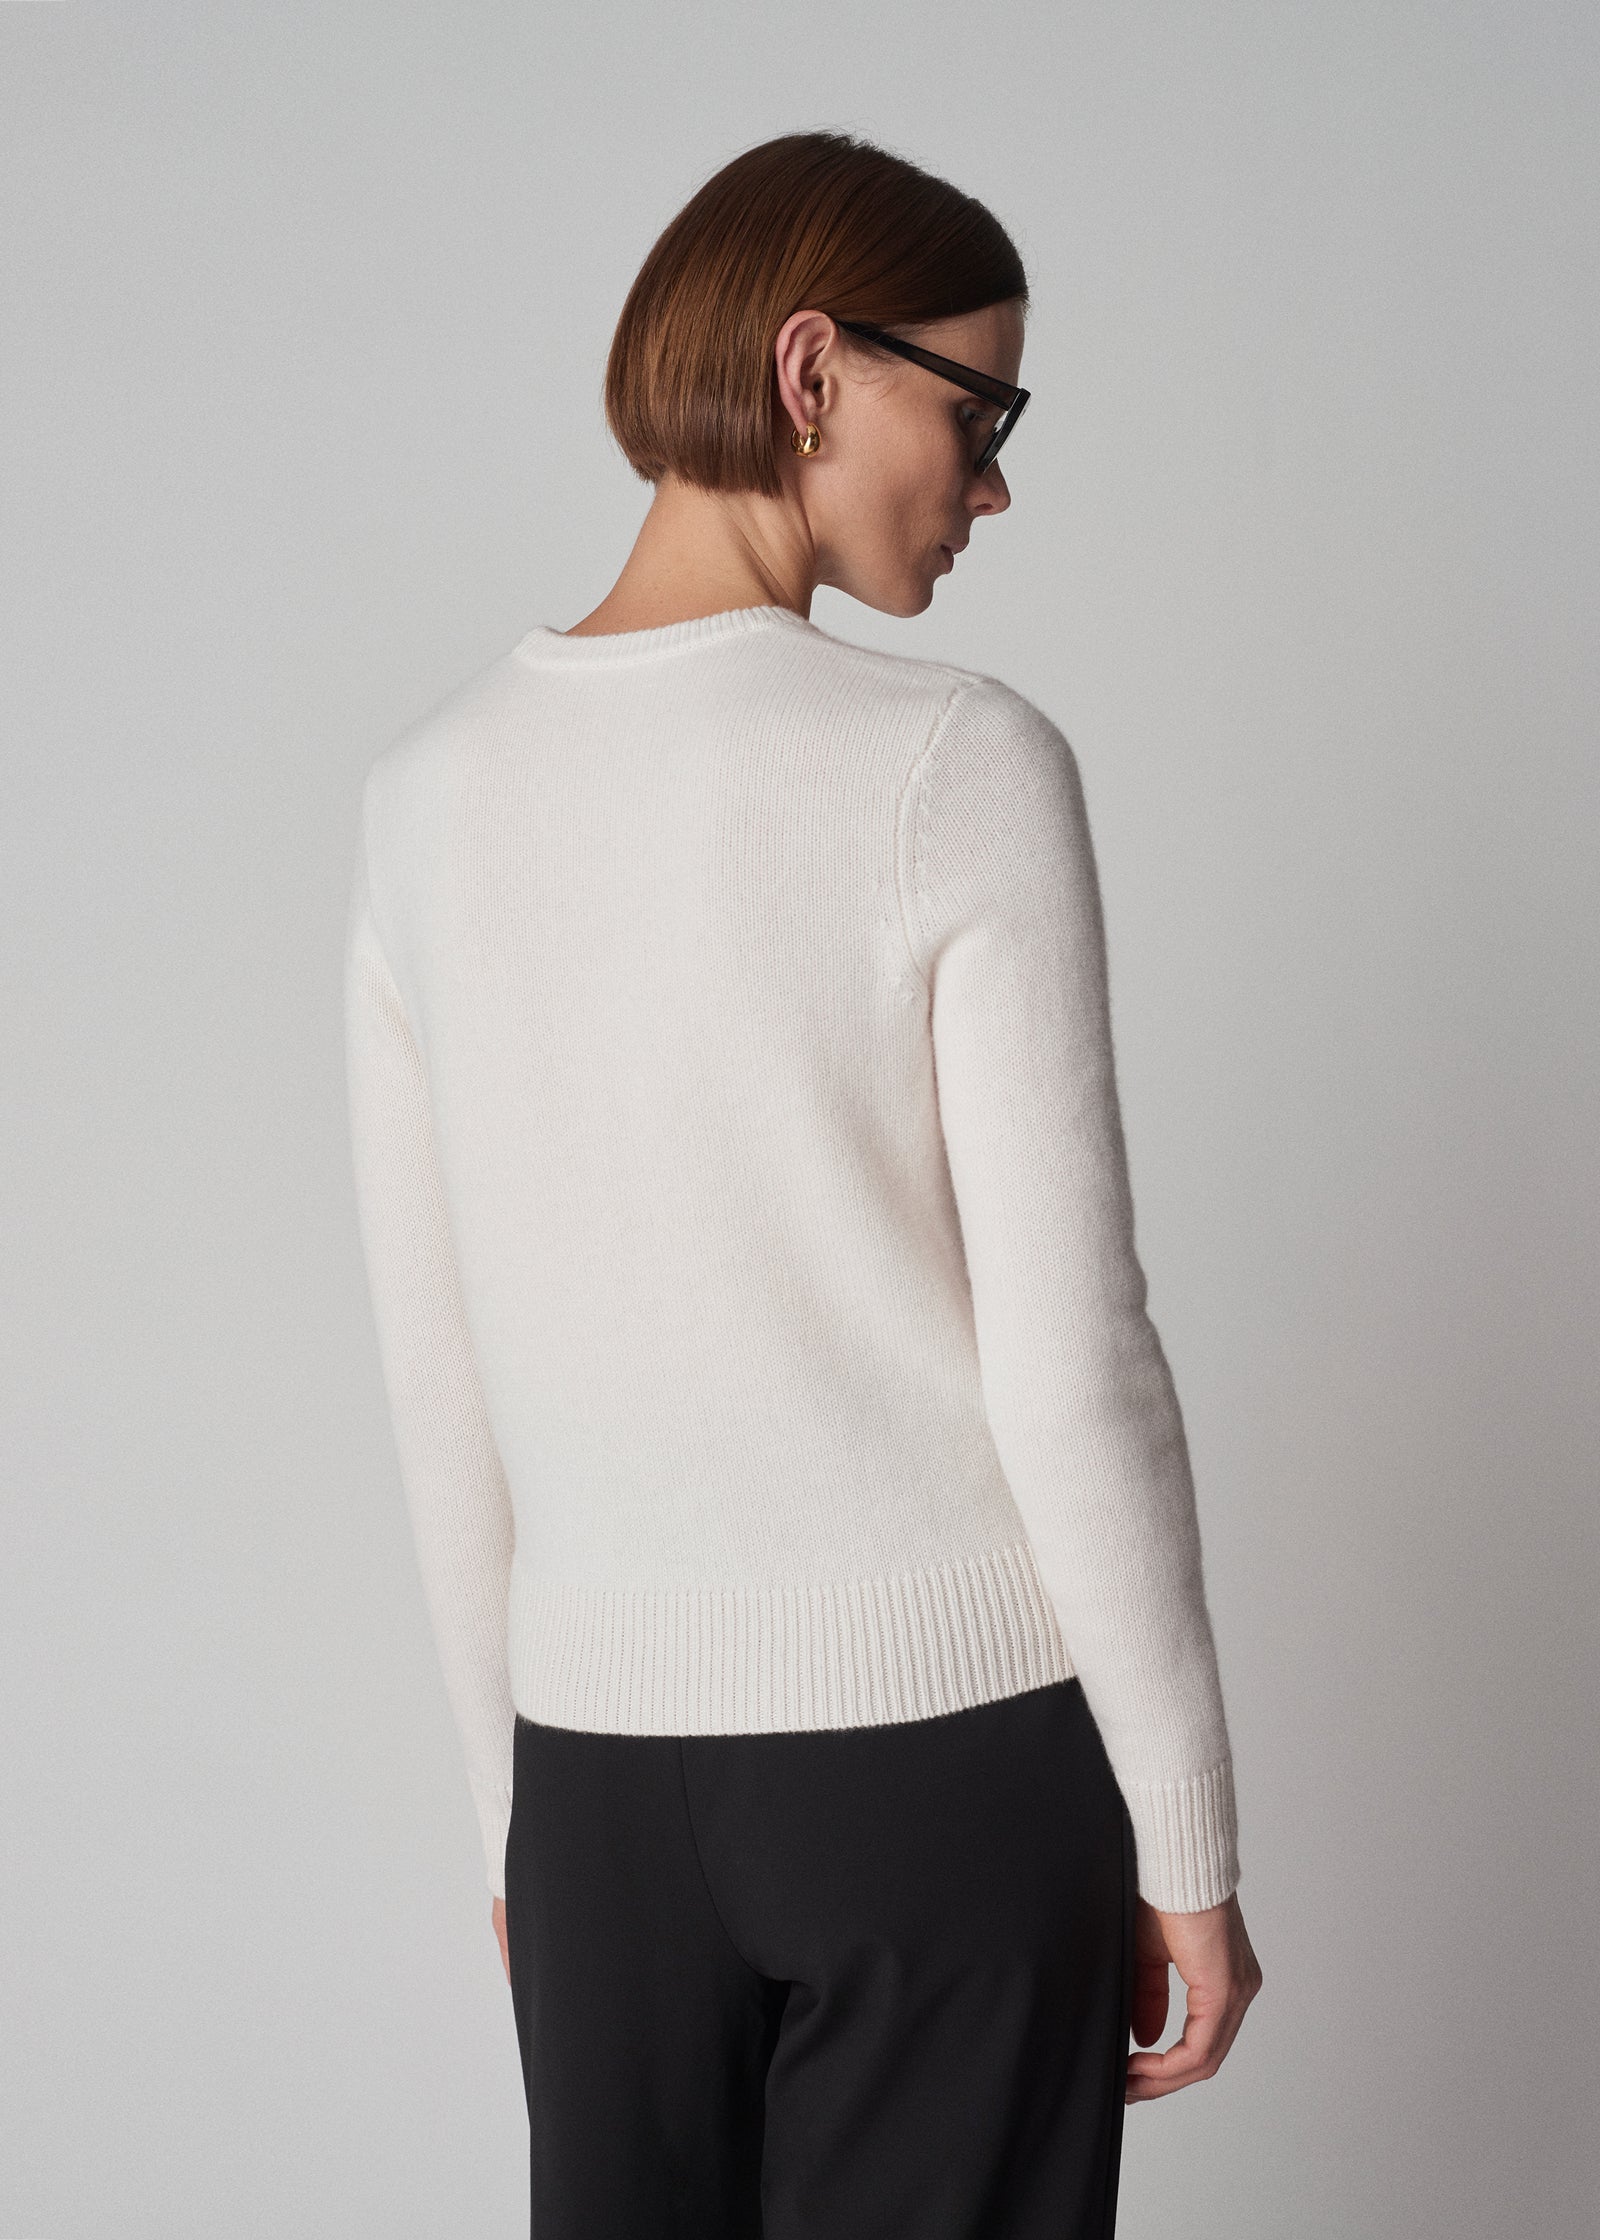 Classic Crew Neck in Cashmere - Ivory - CO Collections